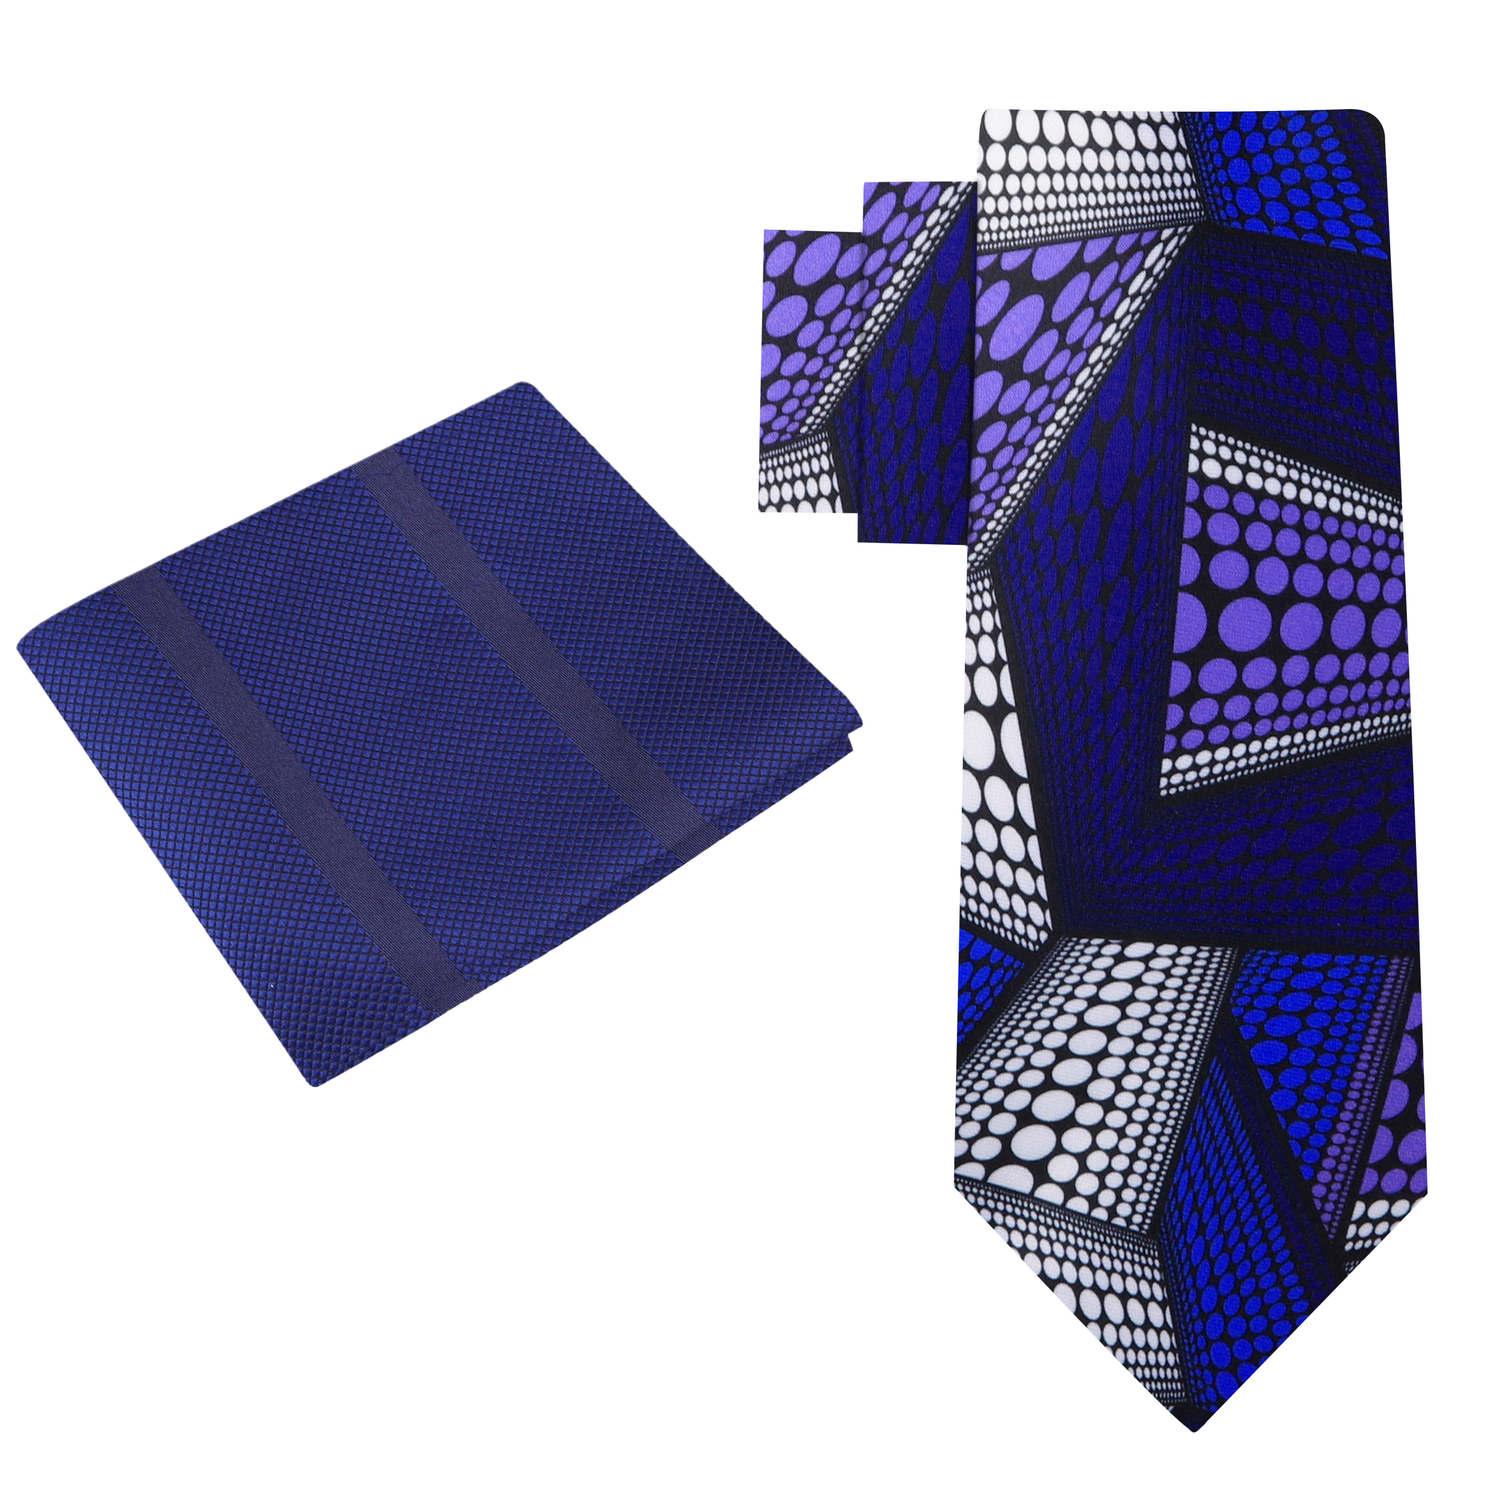 Alt View: Blue, Purple, White Abstract Polka Pattern Necktie with a Blue Stripe Texture Square